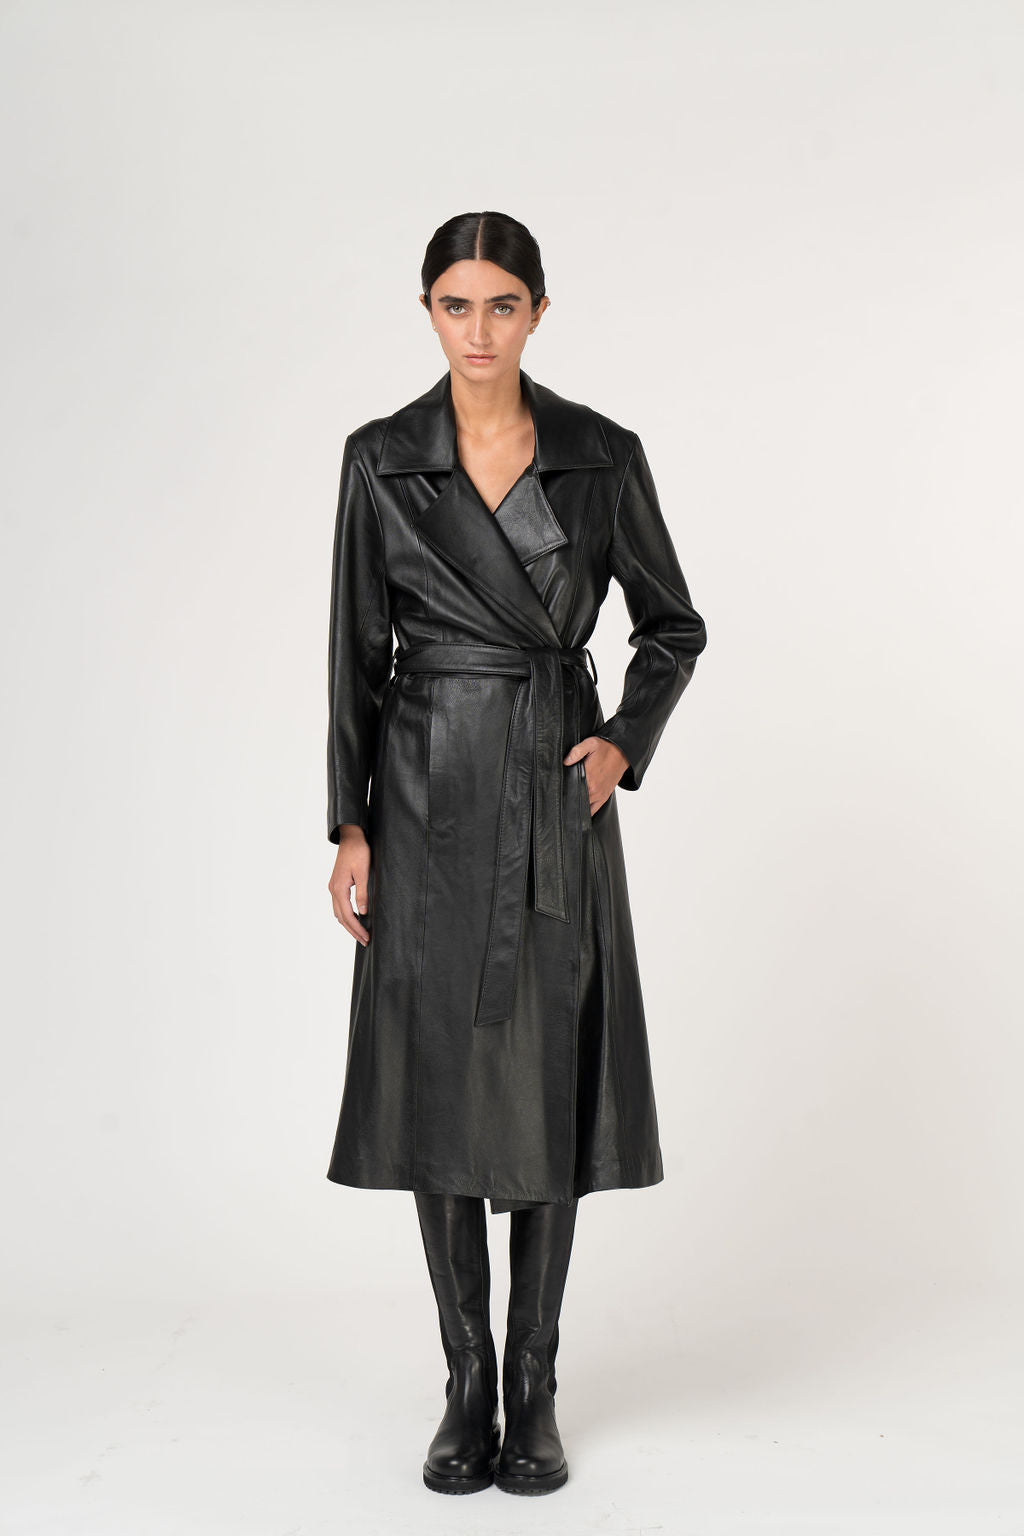 ALL LEATHER JACKETS & CLOTHES – guido1952.com